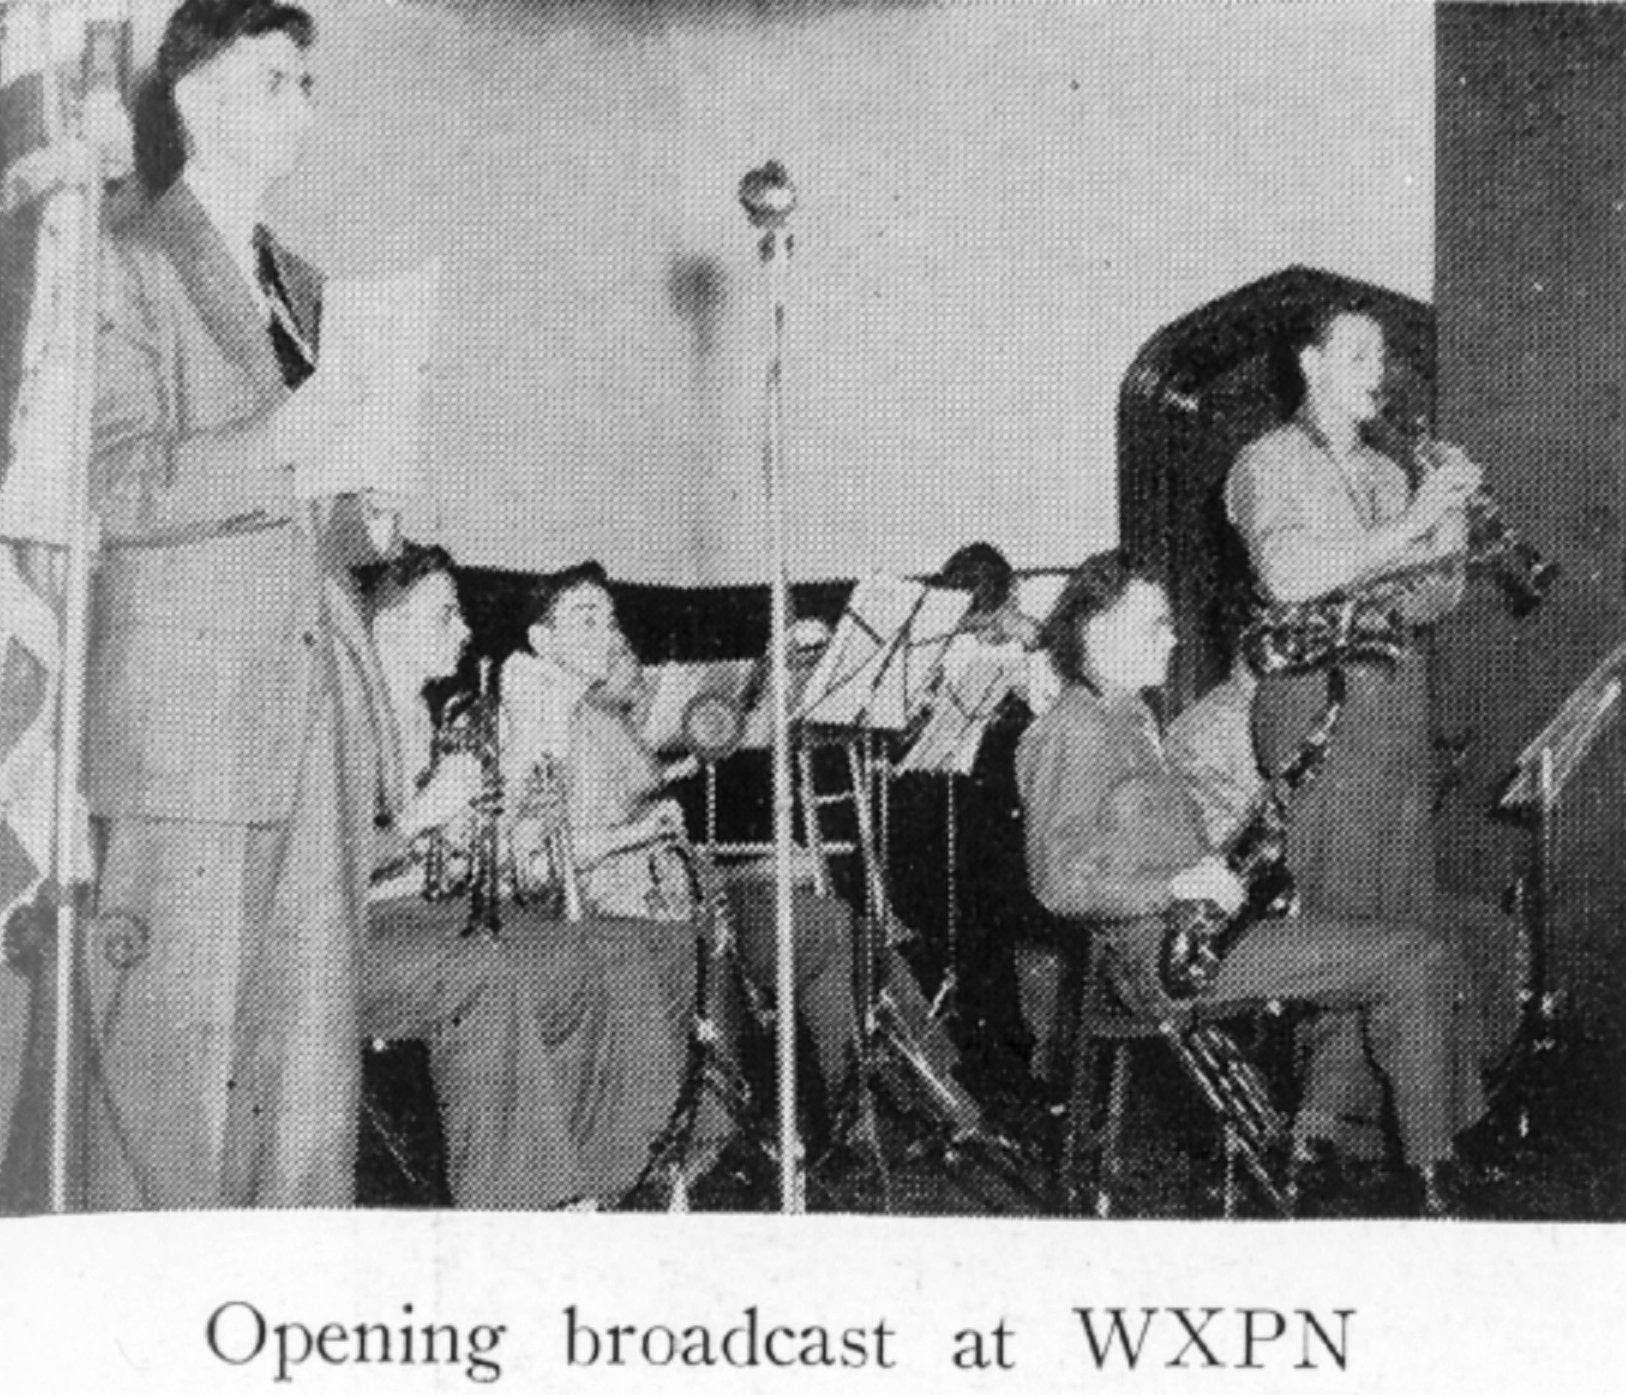 WXPN opening broadcast, 1946